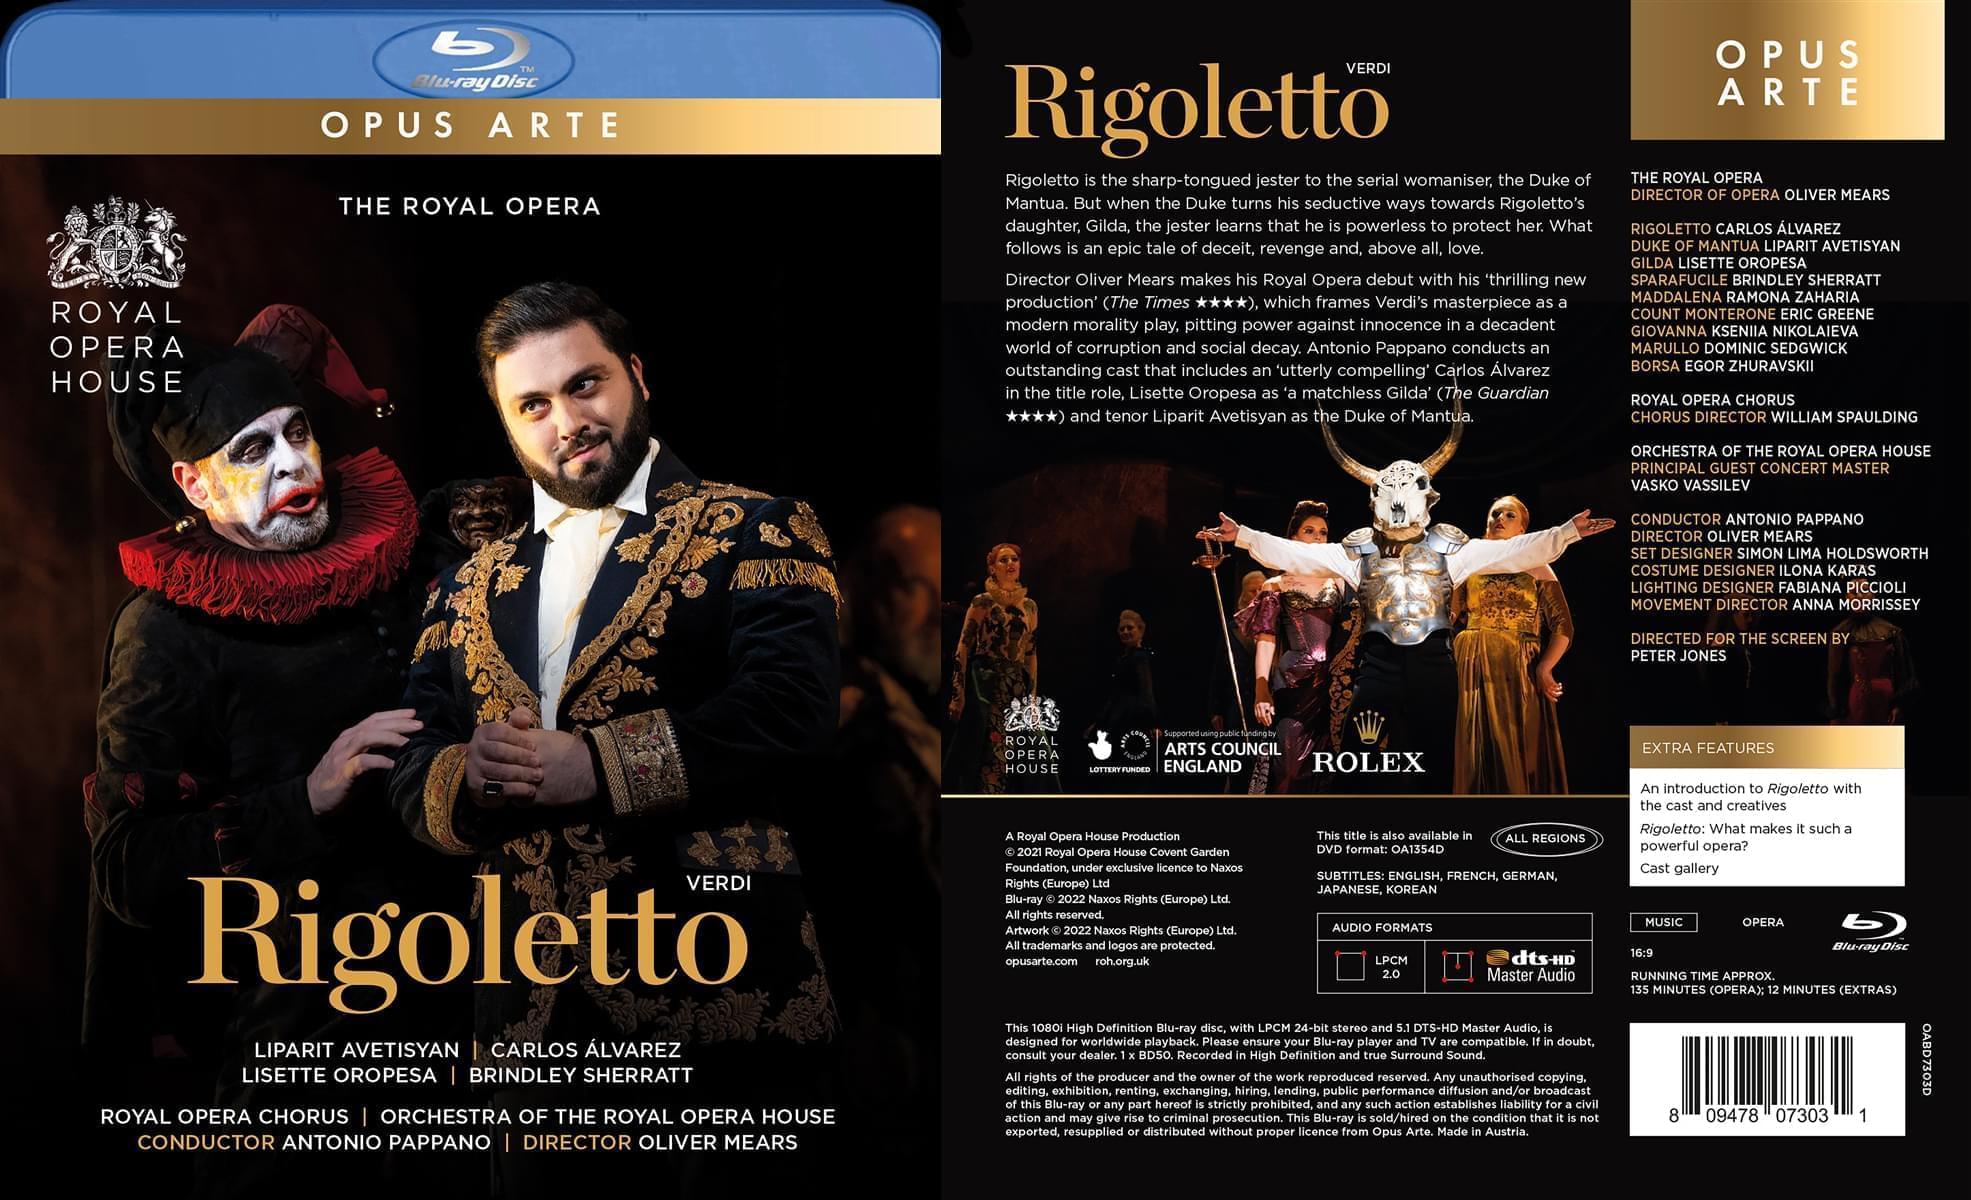 Rigoletto from the Royal Opera House released on Blu-ray